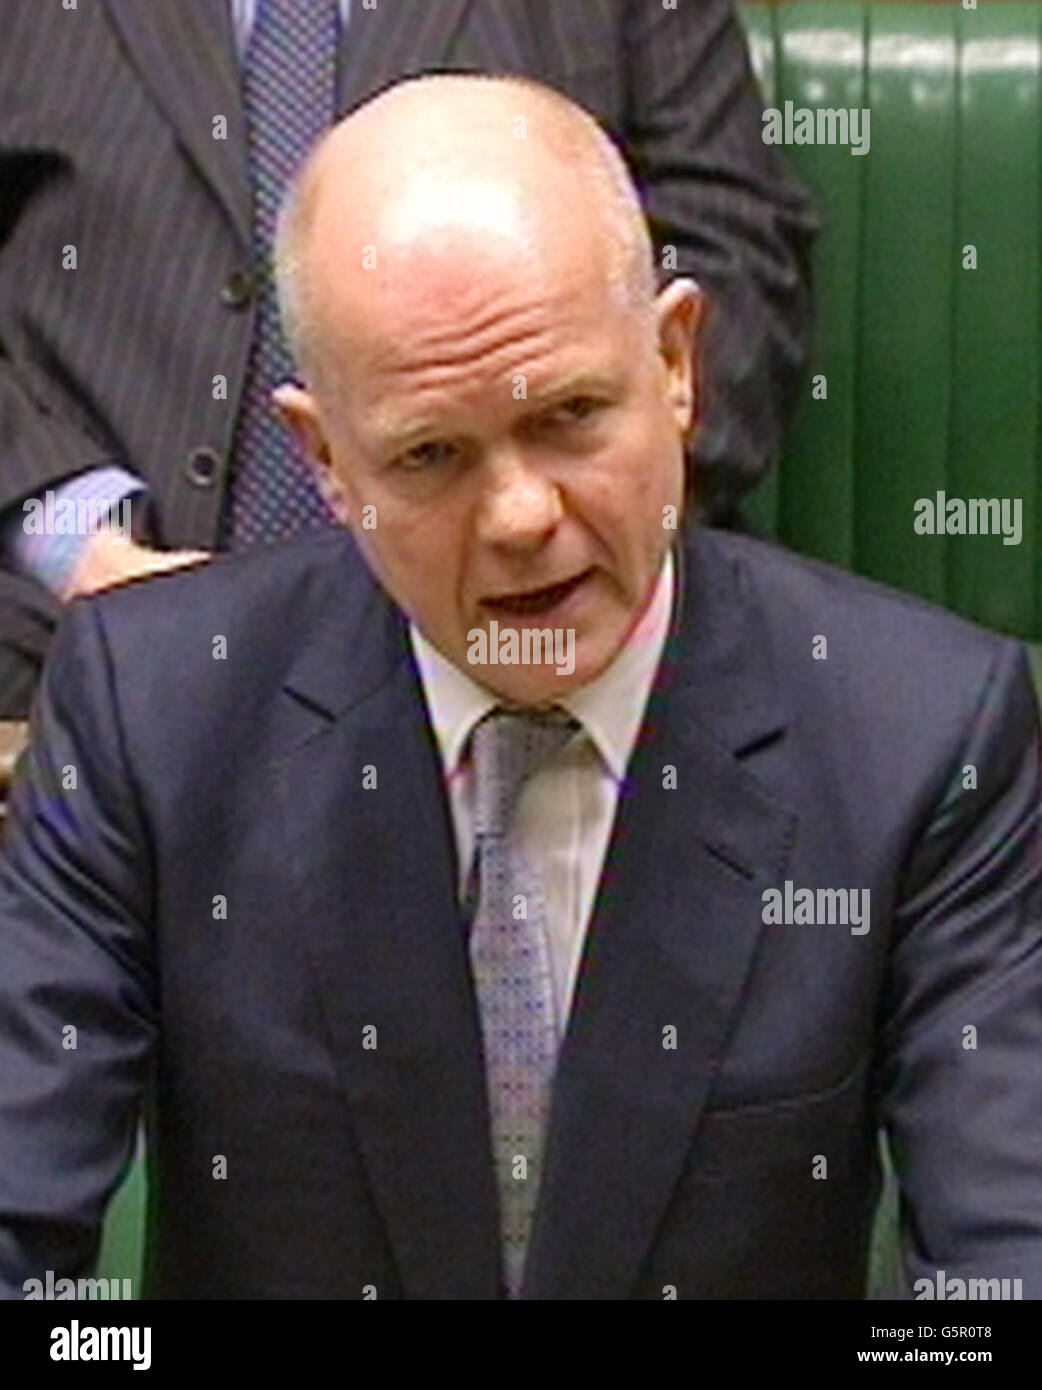 Syria situation statement. Foreign Secretary William Hague making a statement to the House of Commons on the ongoing situation in Syria. Stock Photo